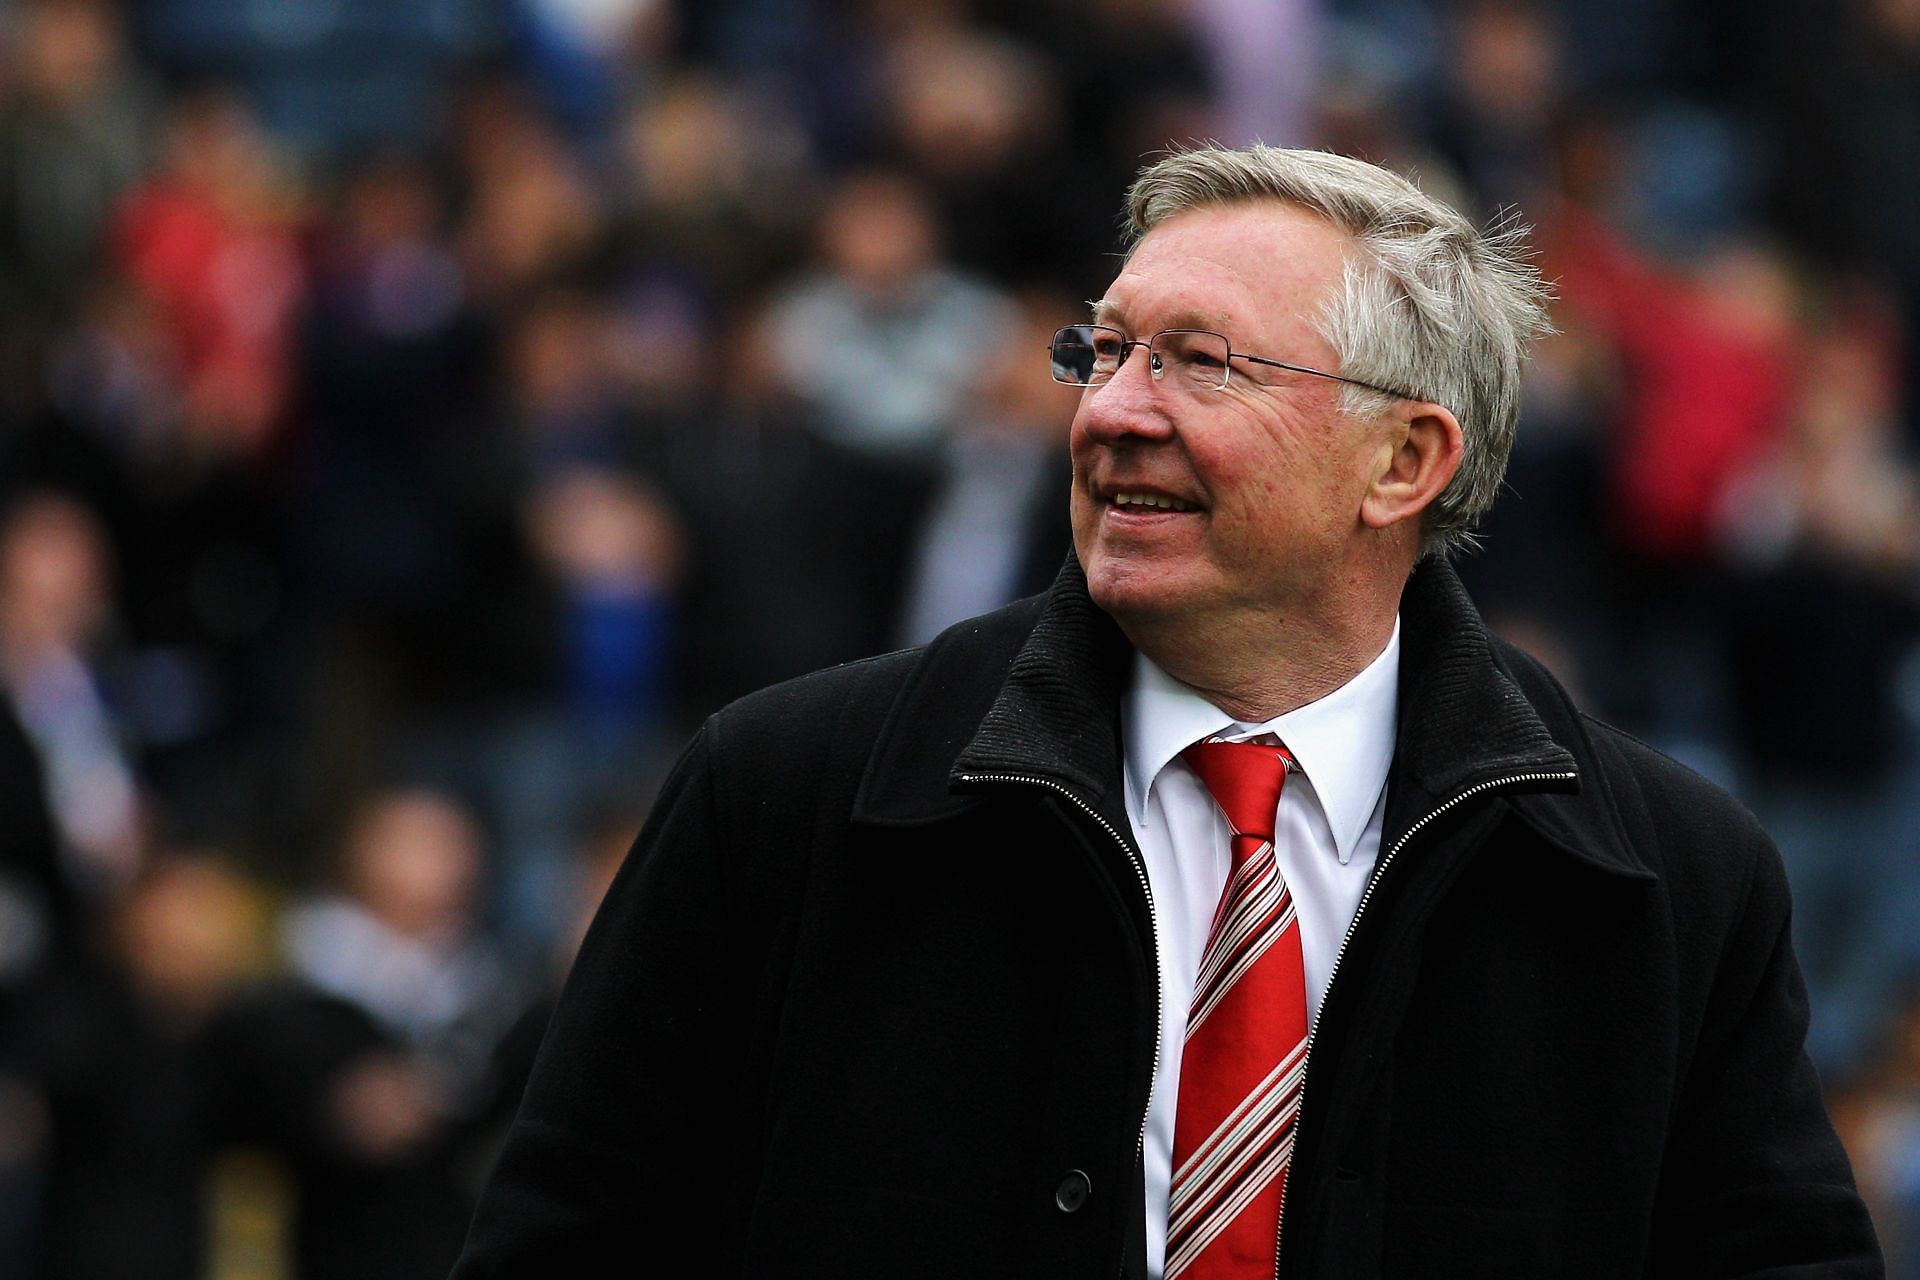 Sir Alex Ferguson was another manager who held Lionel Messi in high regard